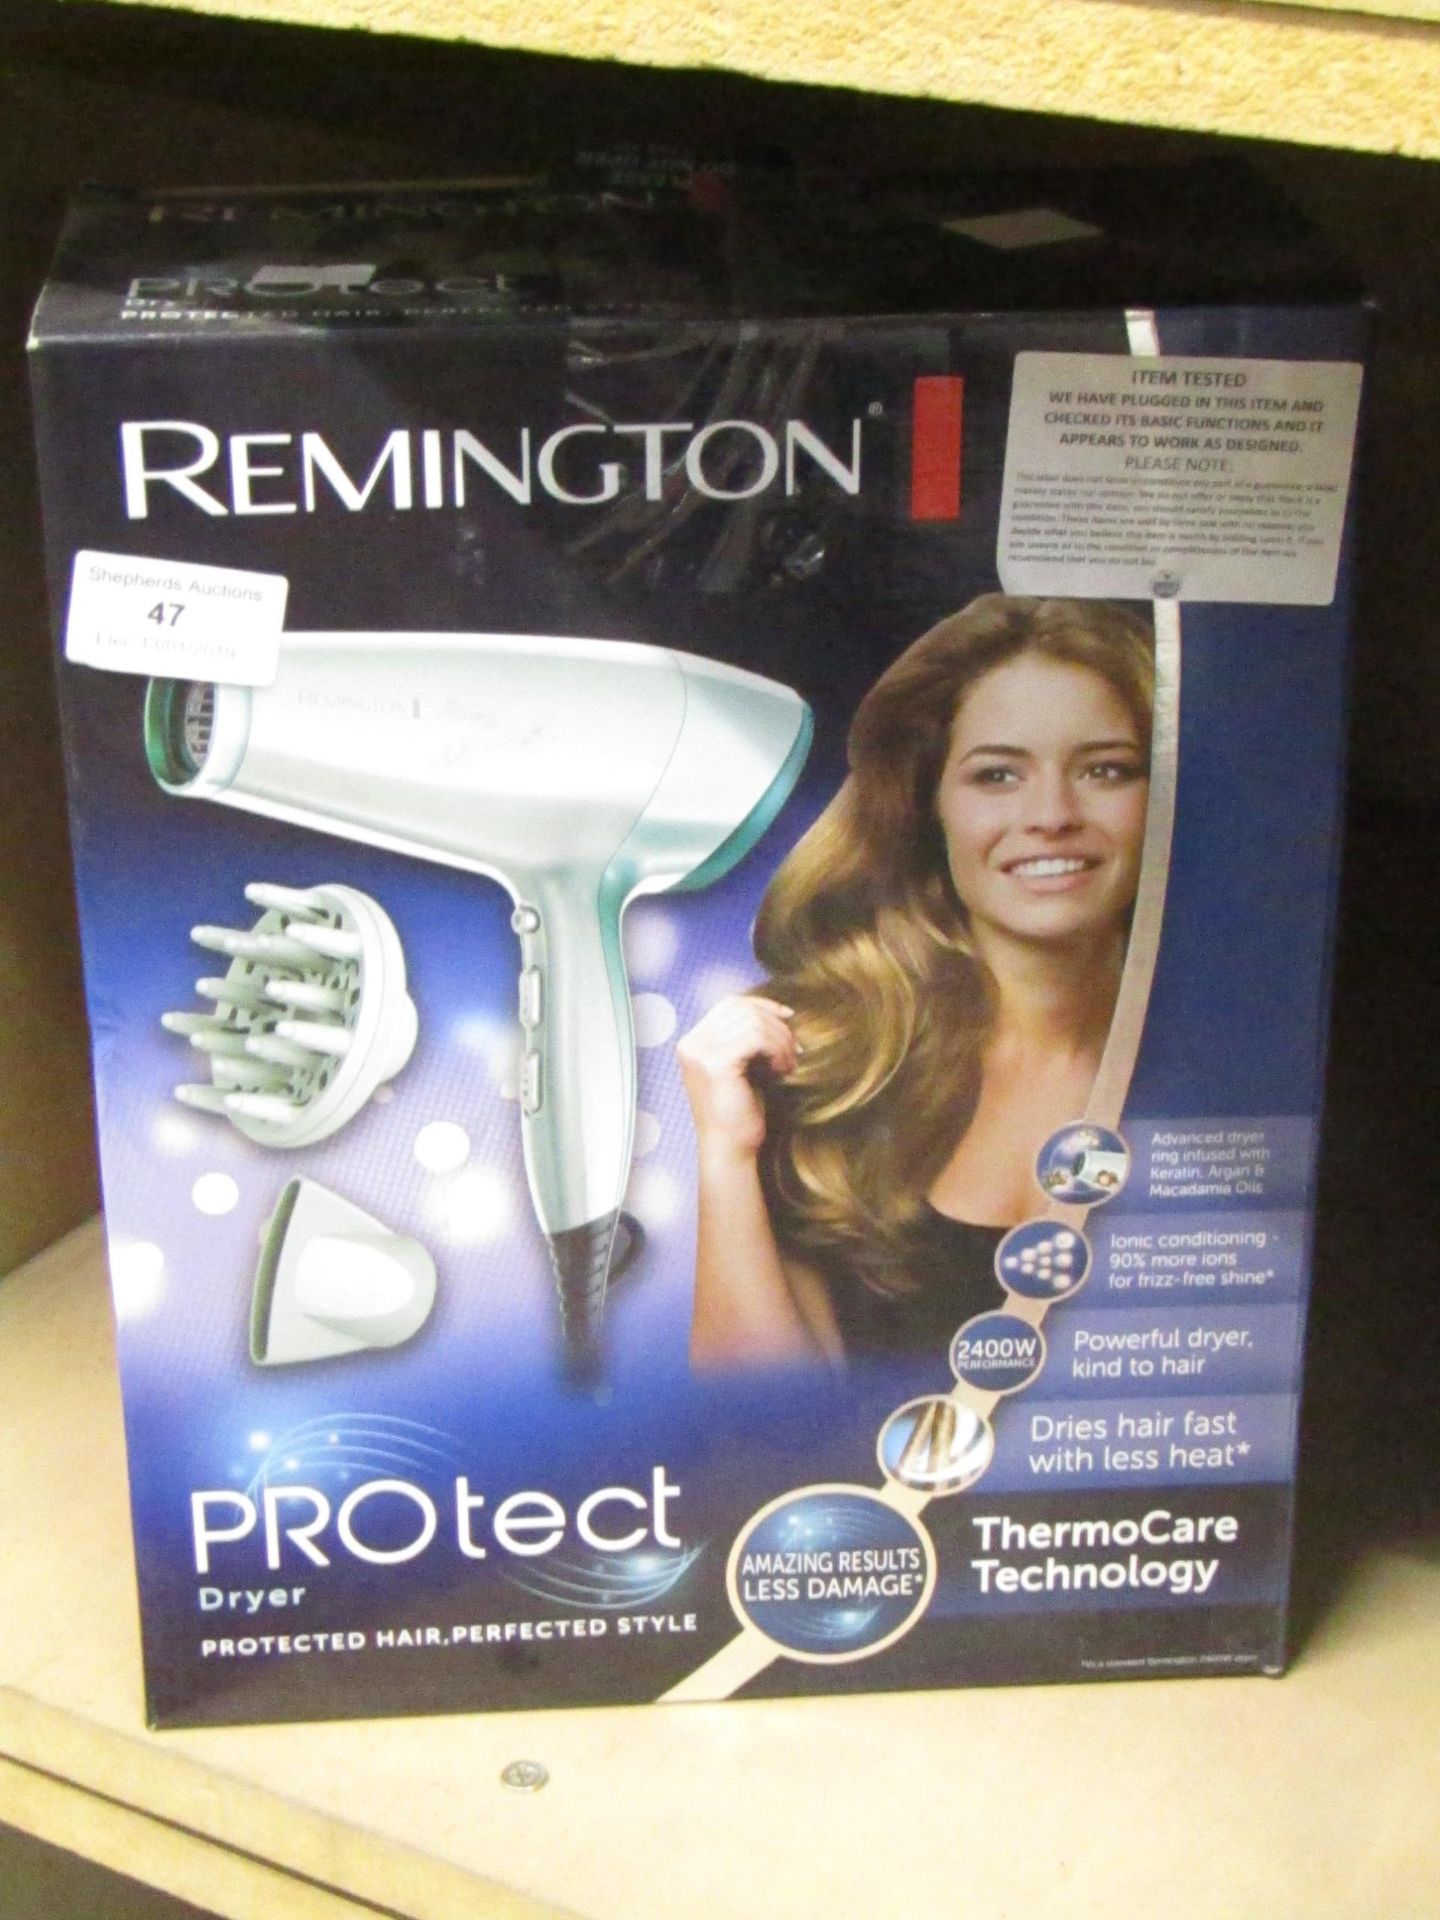 Remington PROtect dryer with thermocare technology. Tested working & boxed.